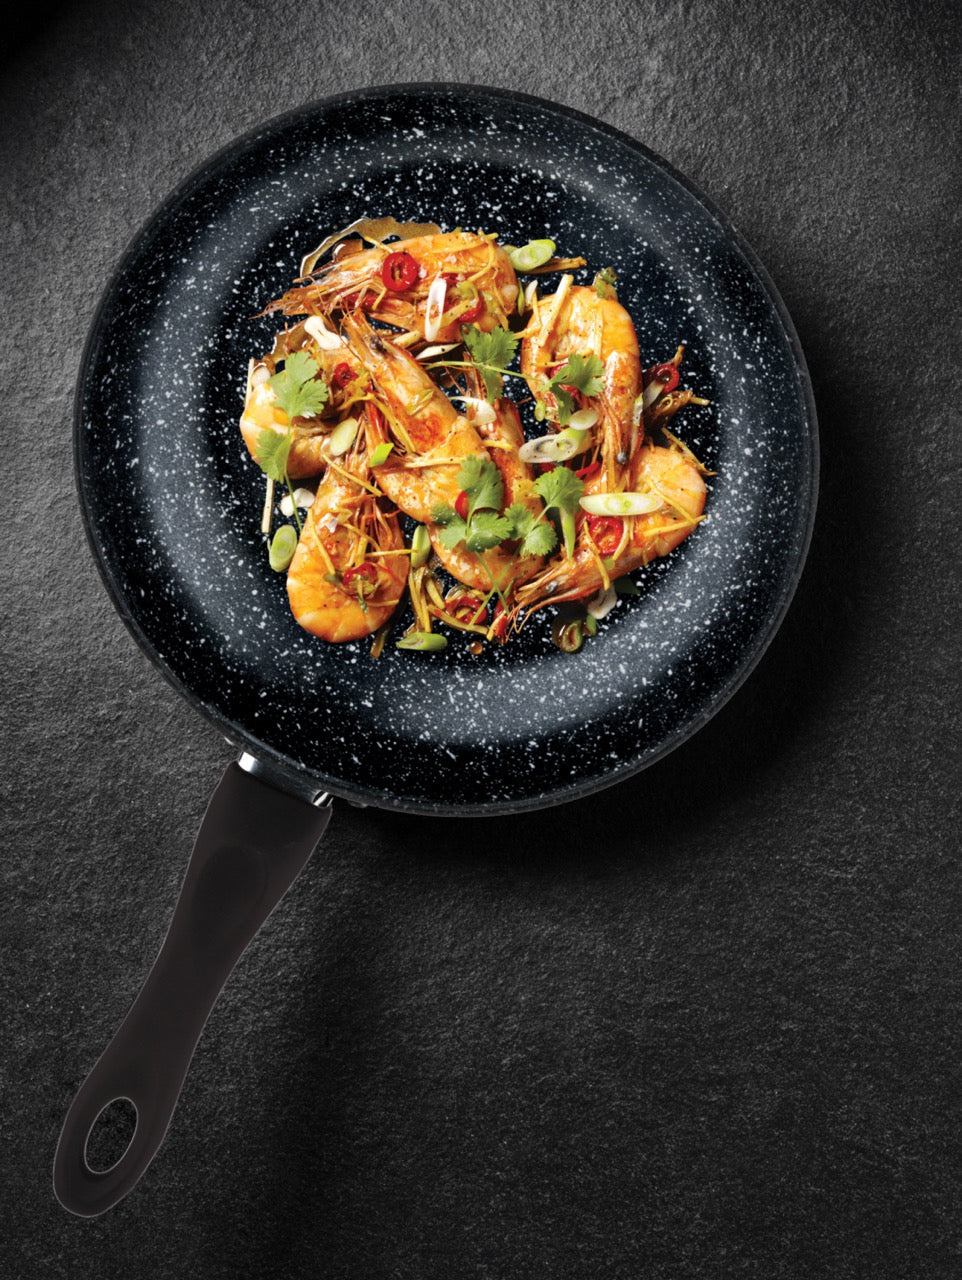 Fantasia Stone Wok with Lid by Mepra | Luxury Cookware | Willow & Albert Home